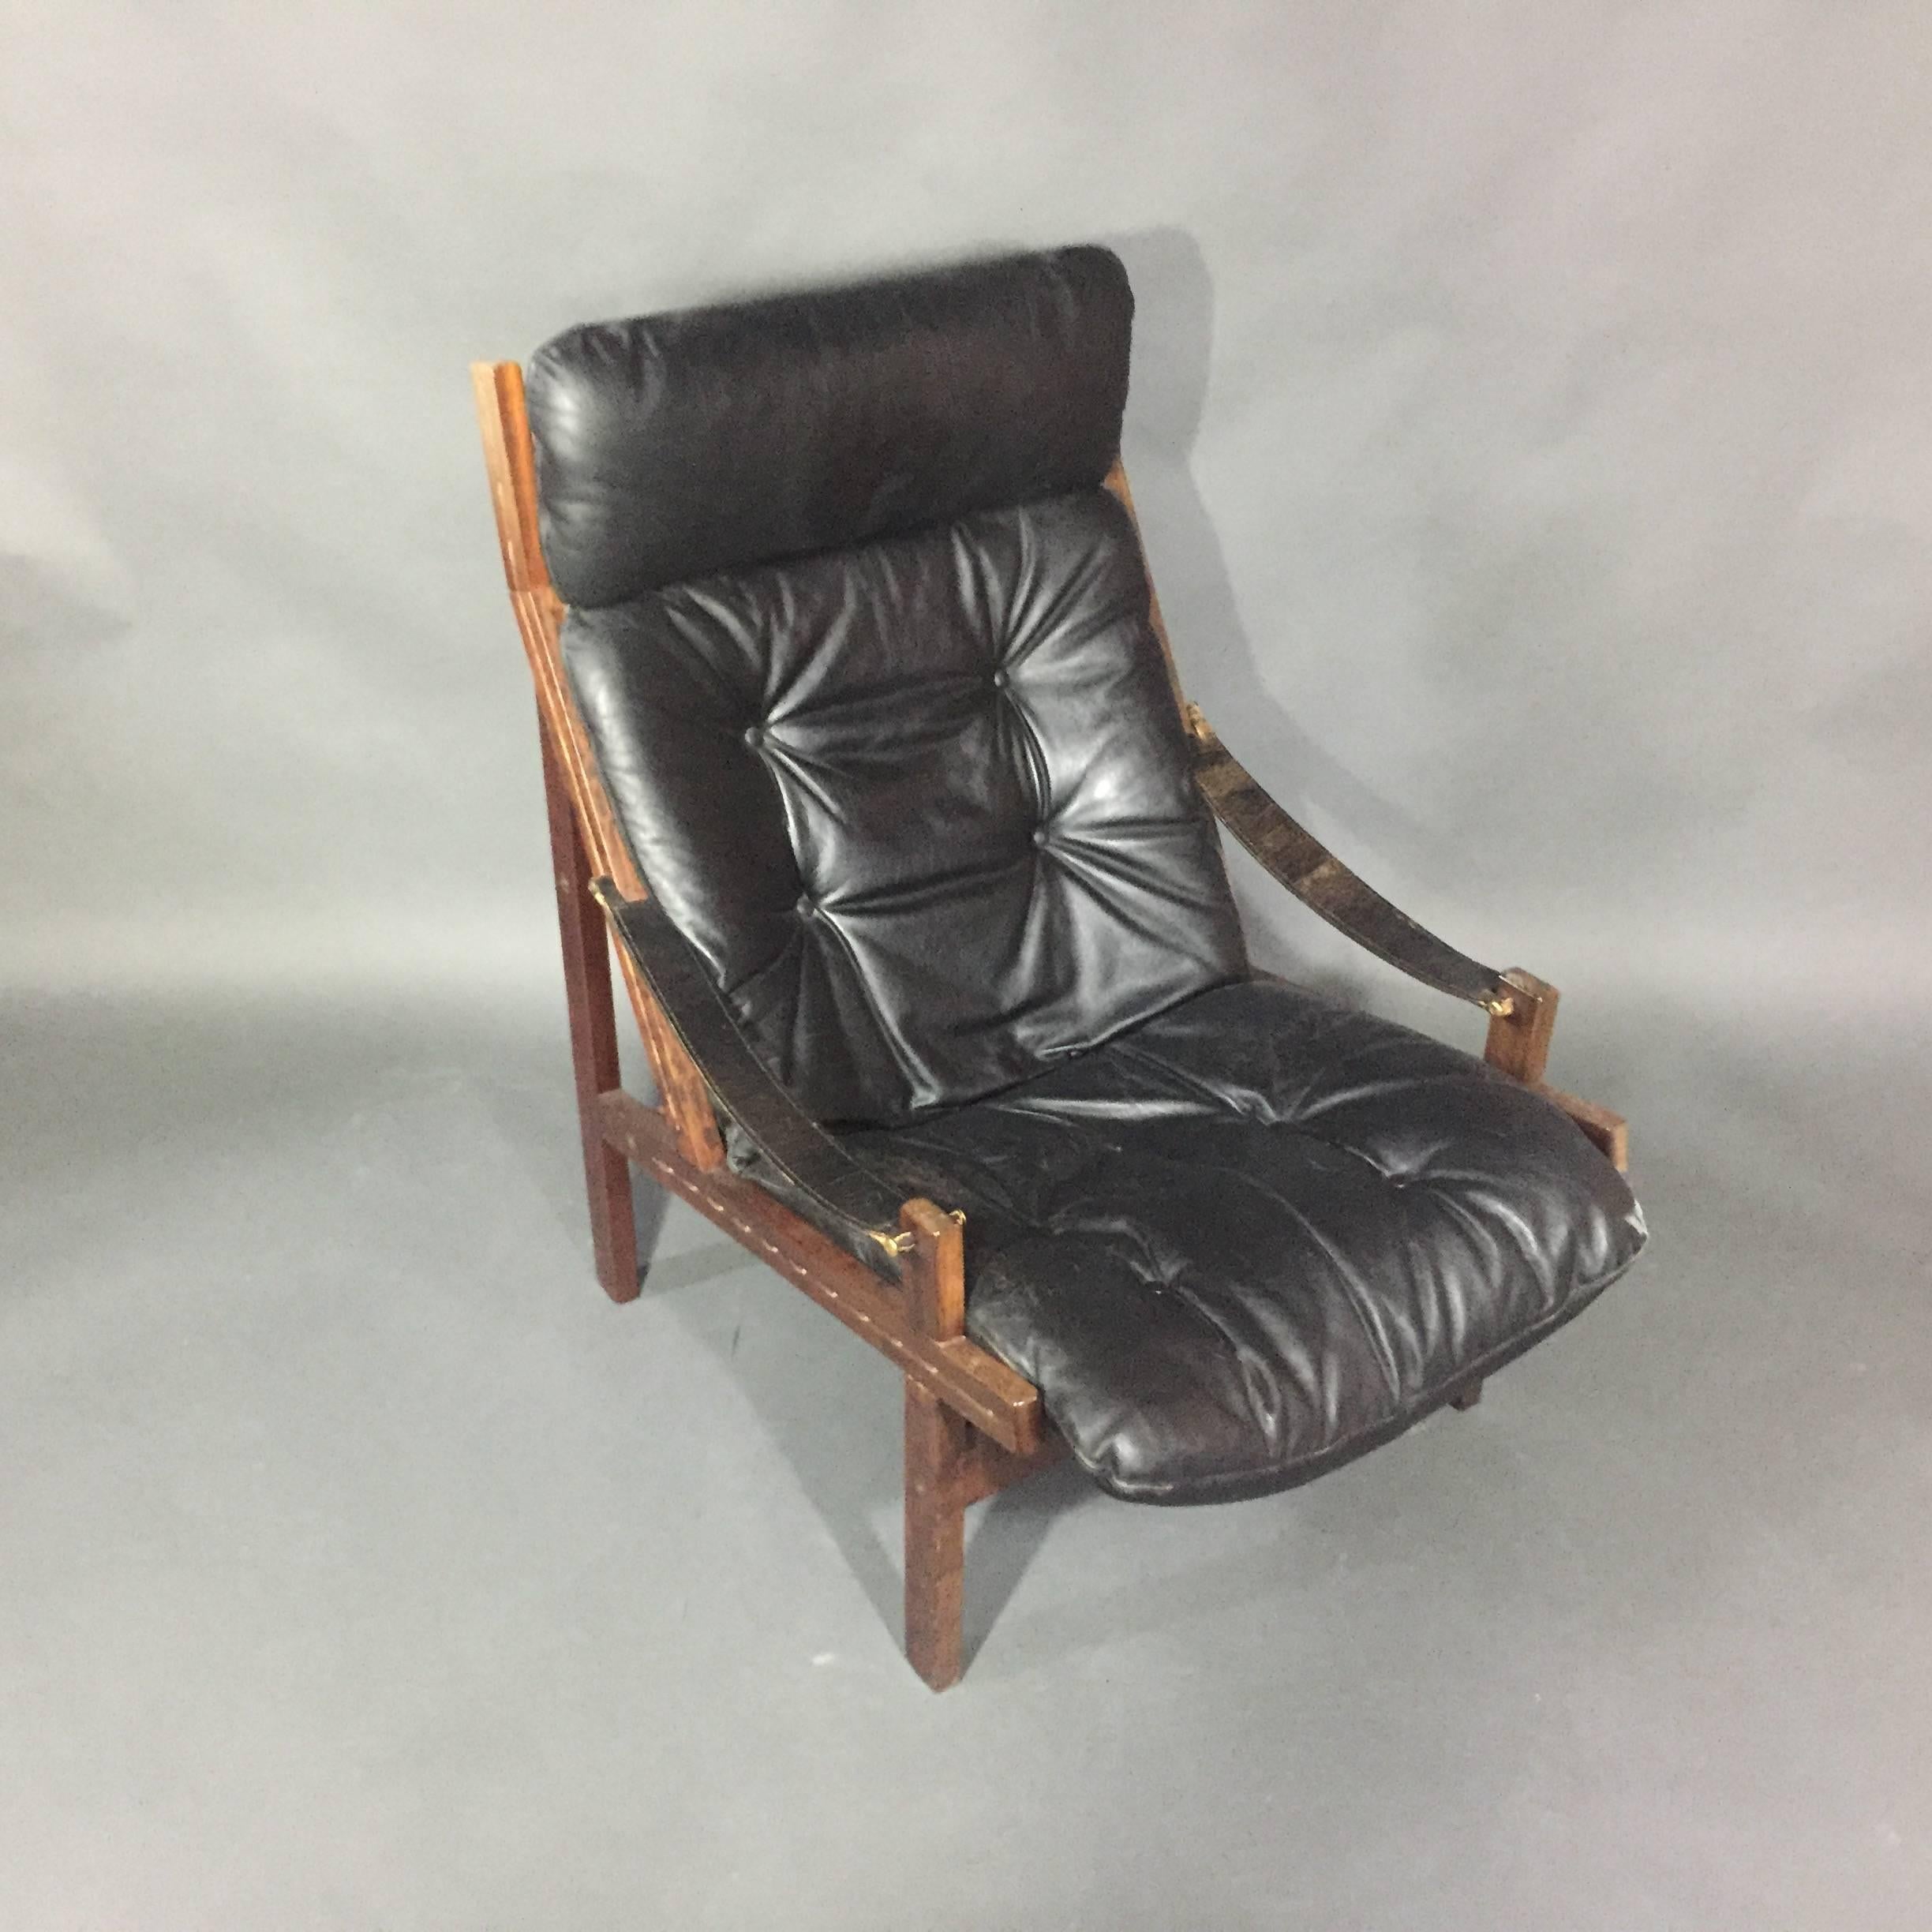 In the safari chair tradition, this high back version in black leather was called 